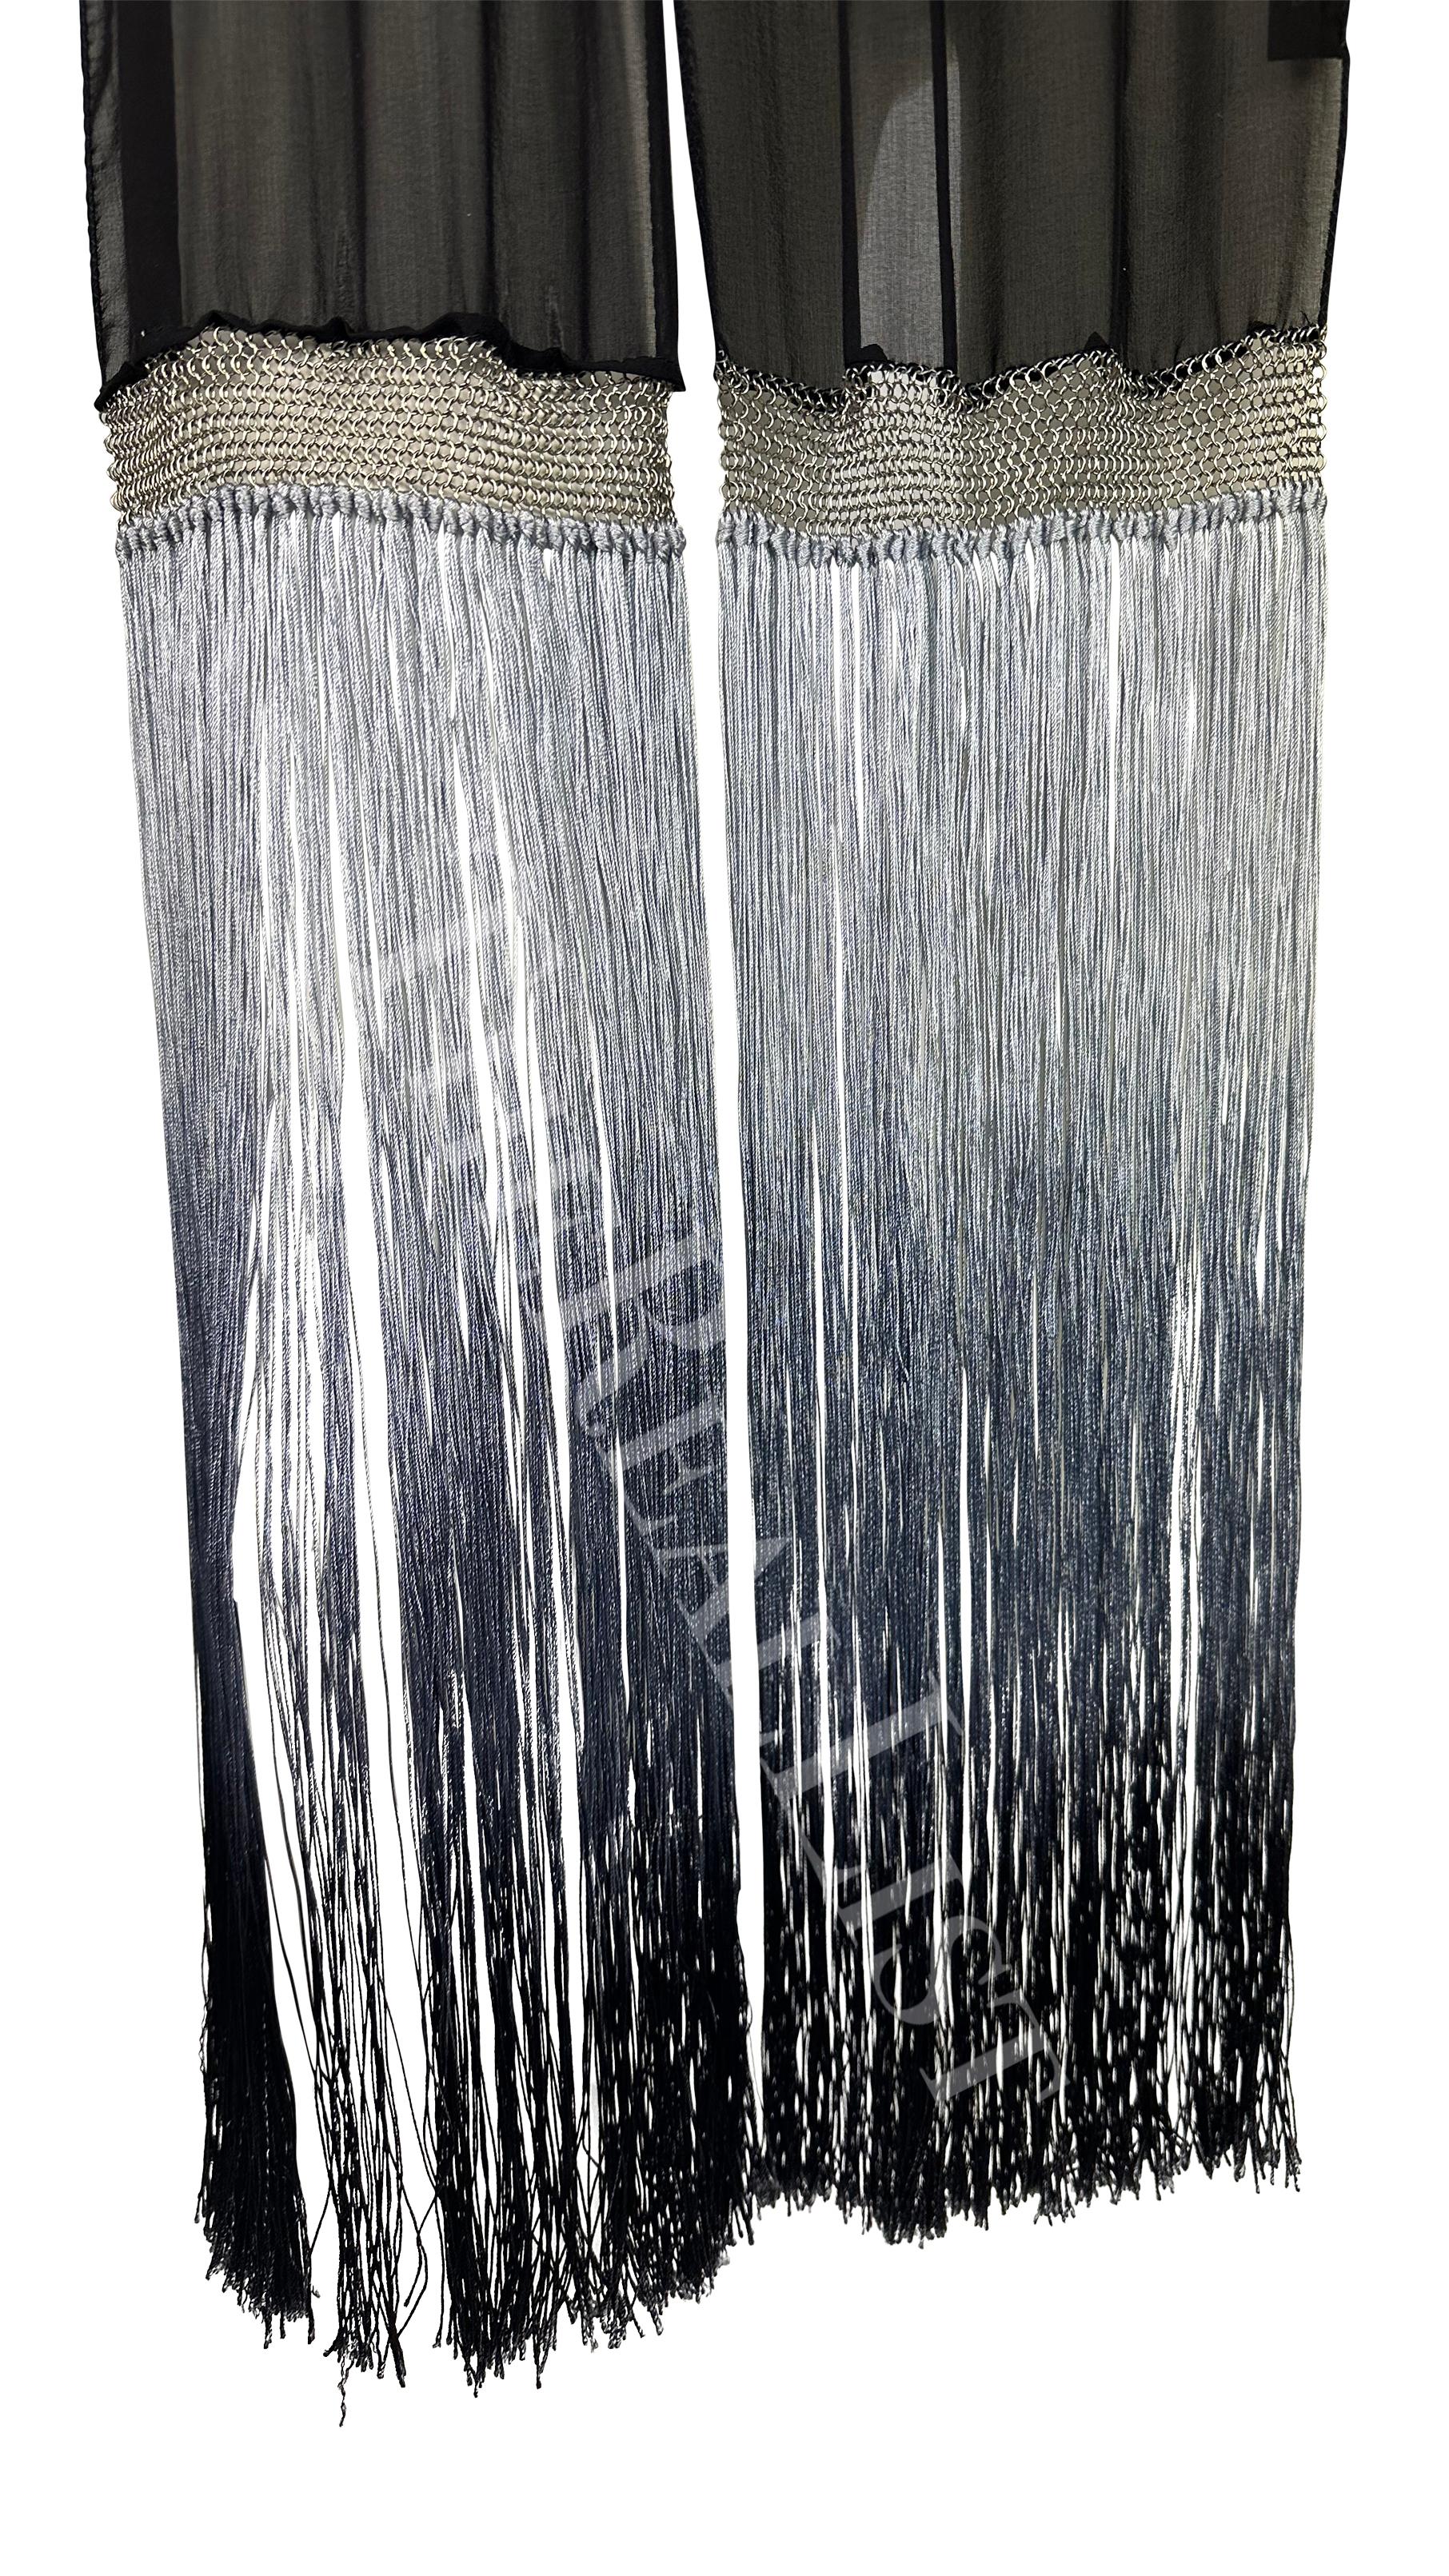 Presenting a black sheer fringe Gucci scarf, designed by Tom Ford. From the Spring/Summer 2004 collection, this chic scarf is made complete with a chain mail accent and ombre fringe.

Approximate measurements:
Length: 70